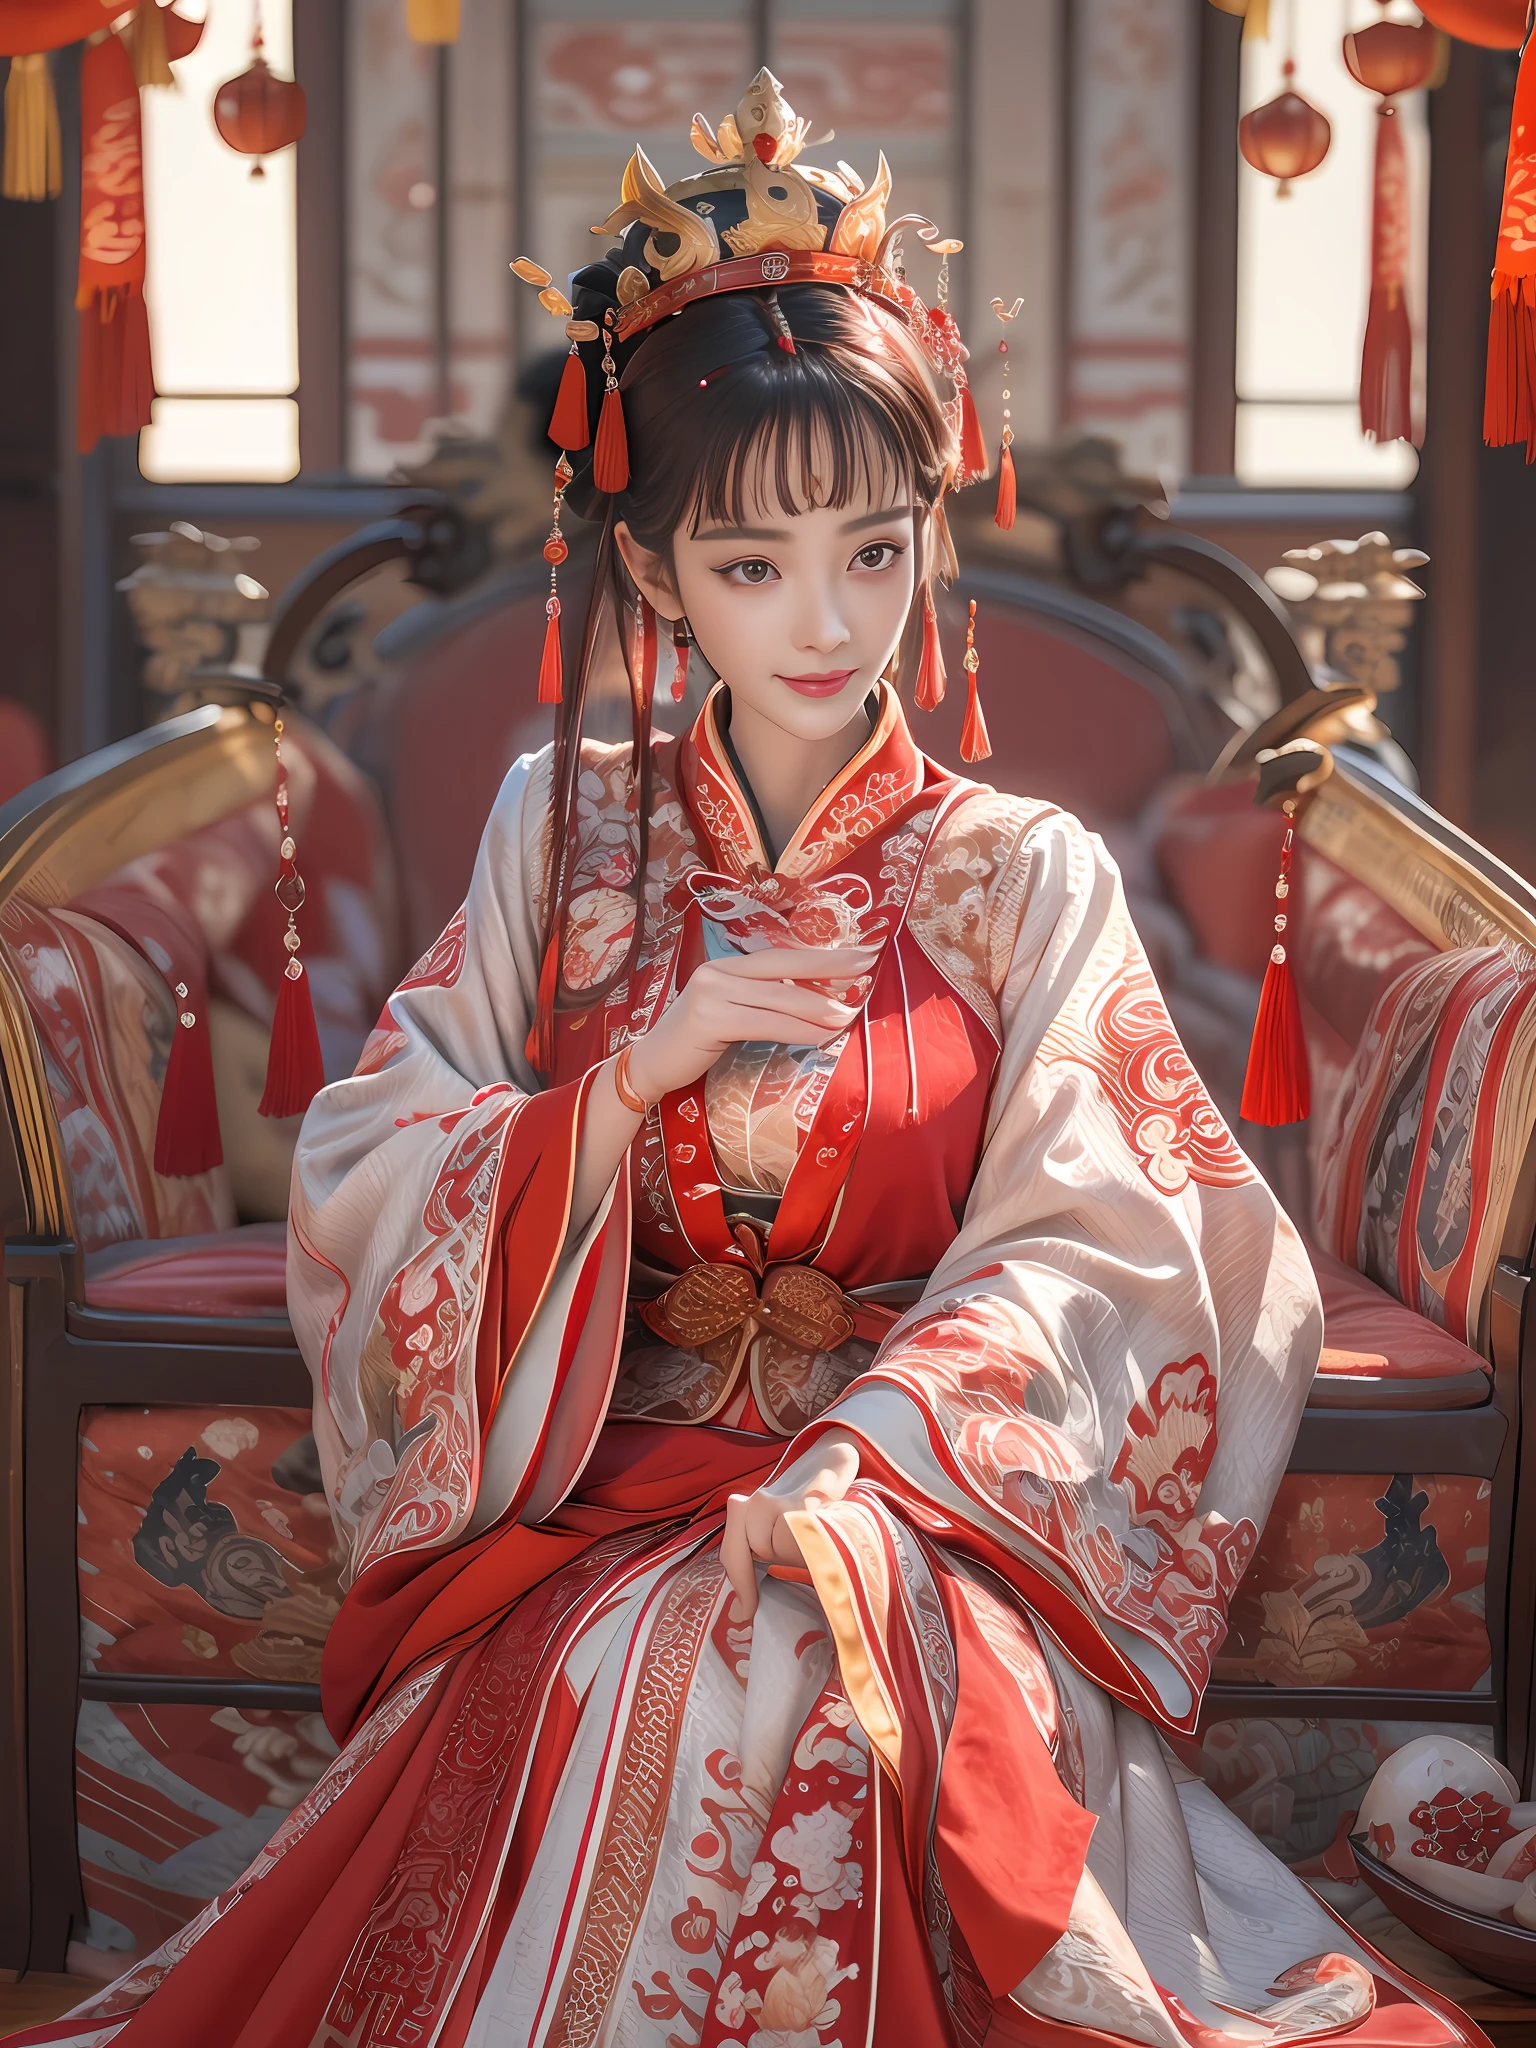 (Best quality: 1.1), (Realistic: 1.1), (Photography: 1.1), (highly details: 1.1), A woman wears a red and gold dress，Woman with a crown on her head, A hair stick, (sitting on red bed), Blushing, Shy, black_Hair, crown, Looking down, (2 red candles), Chinese_clothes, Curtains, Earrings, Hair_decorations, Hanfu, interiors, jewelry, Long_Sleeves, Red dress, Redlip, nipple tassels, (Red quilt), (red palace: 1.2), (3DMM: 1.5),mix4,